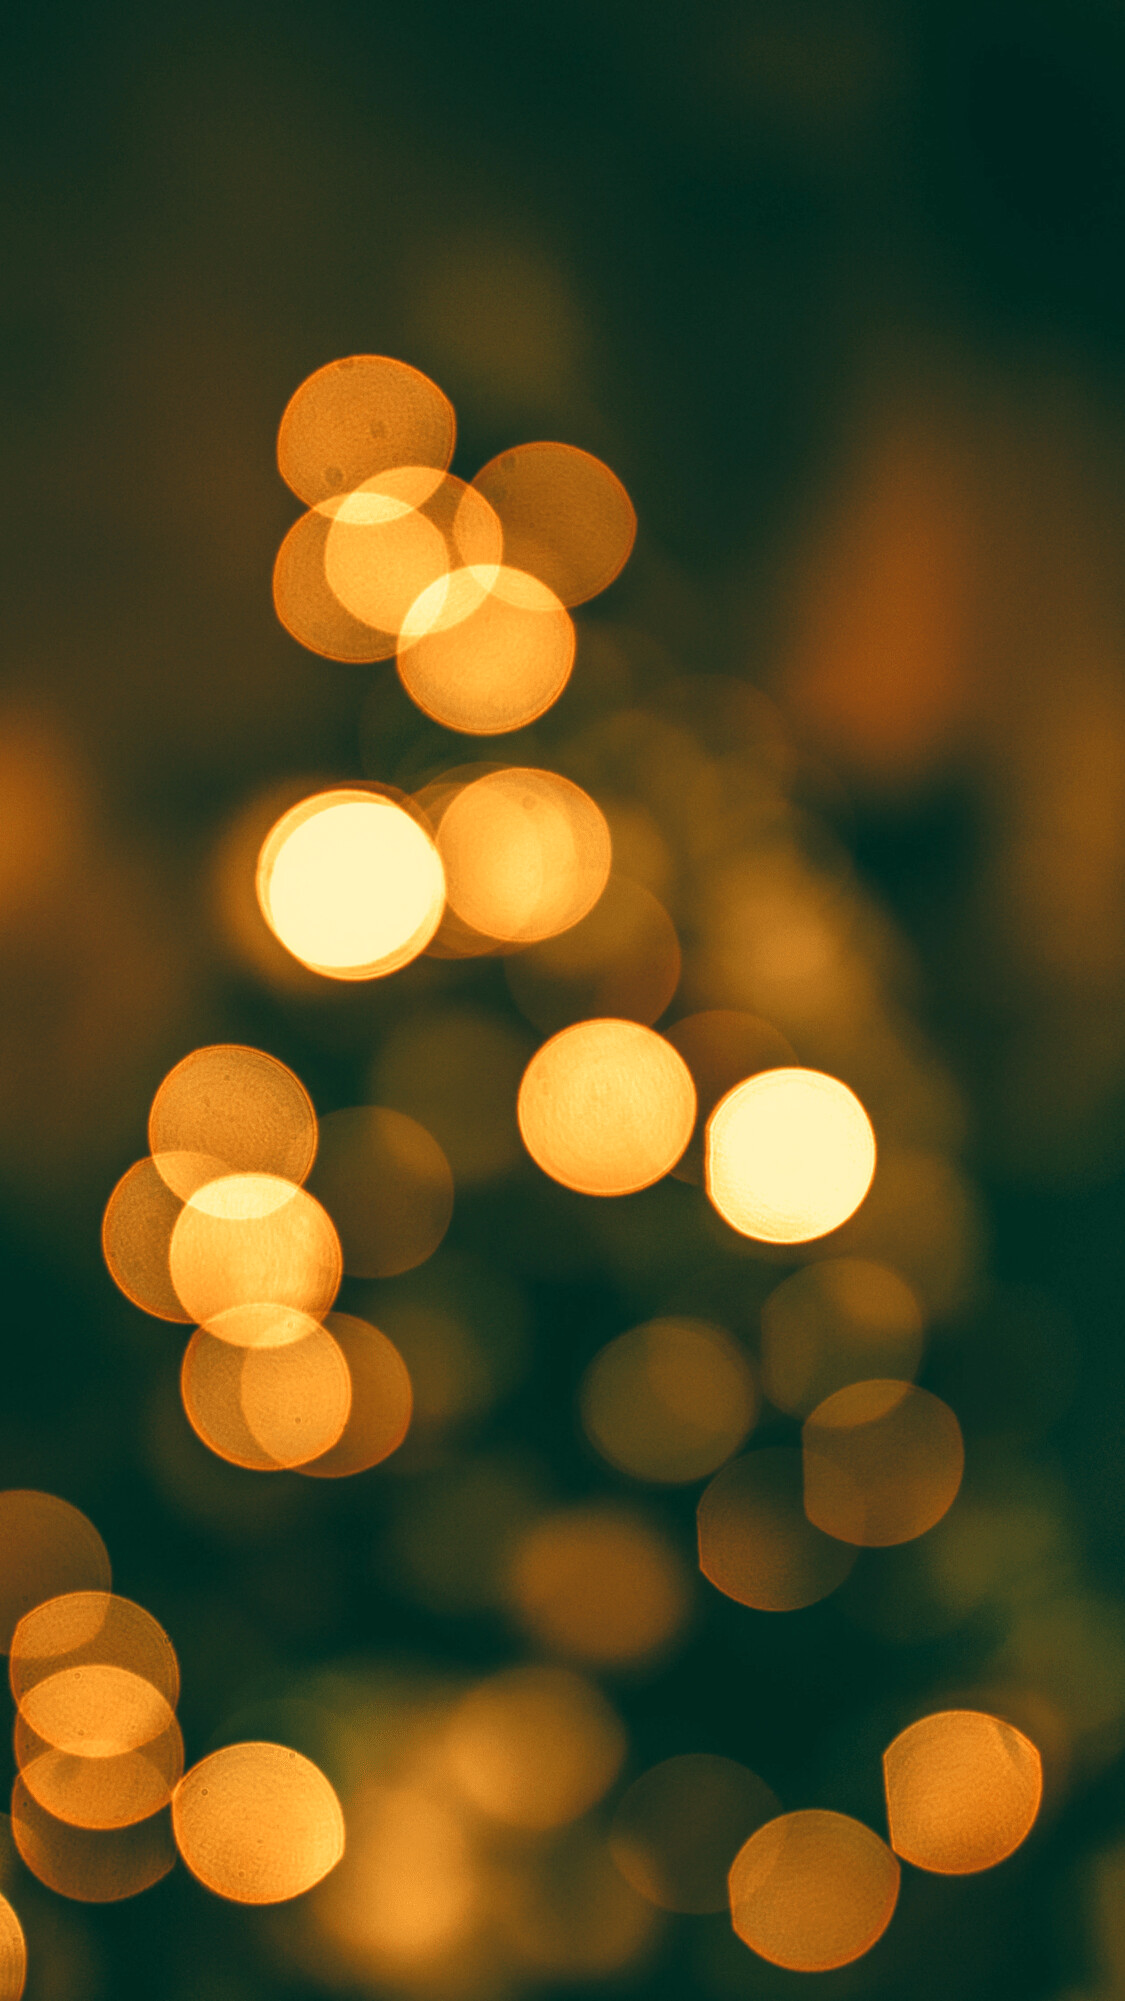 Gold Lights: Sparkling golden bubbles, Out-of-focus blurred lights, Christmas decoration. 1130x2010 HD Wallpaper.